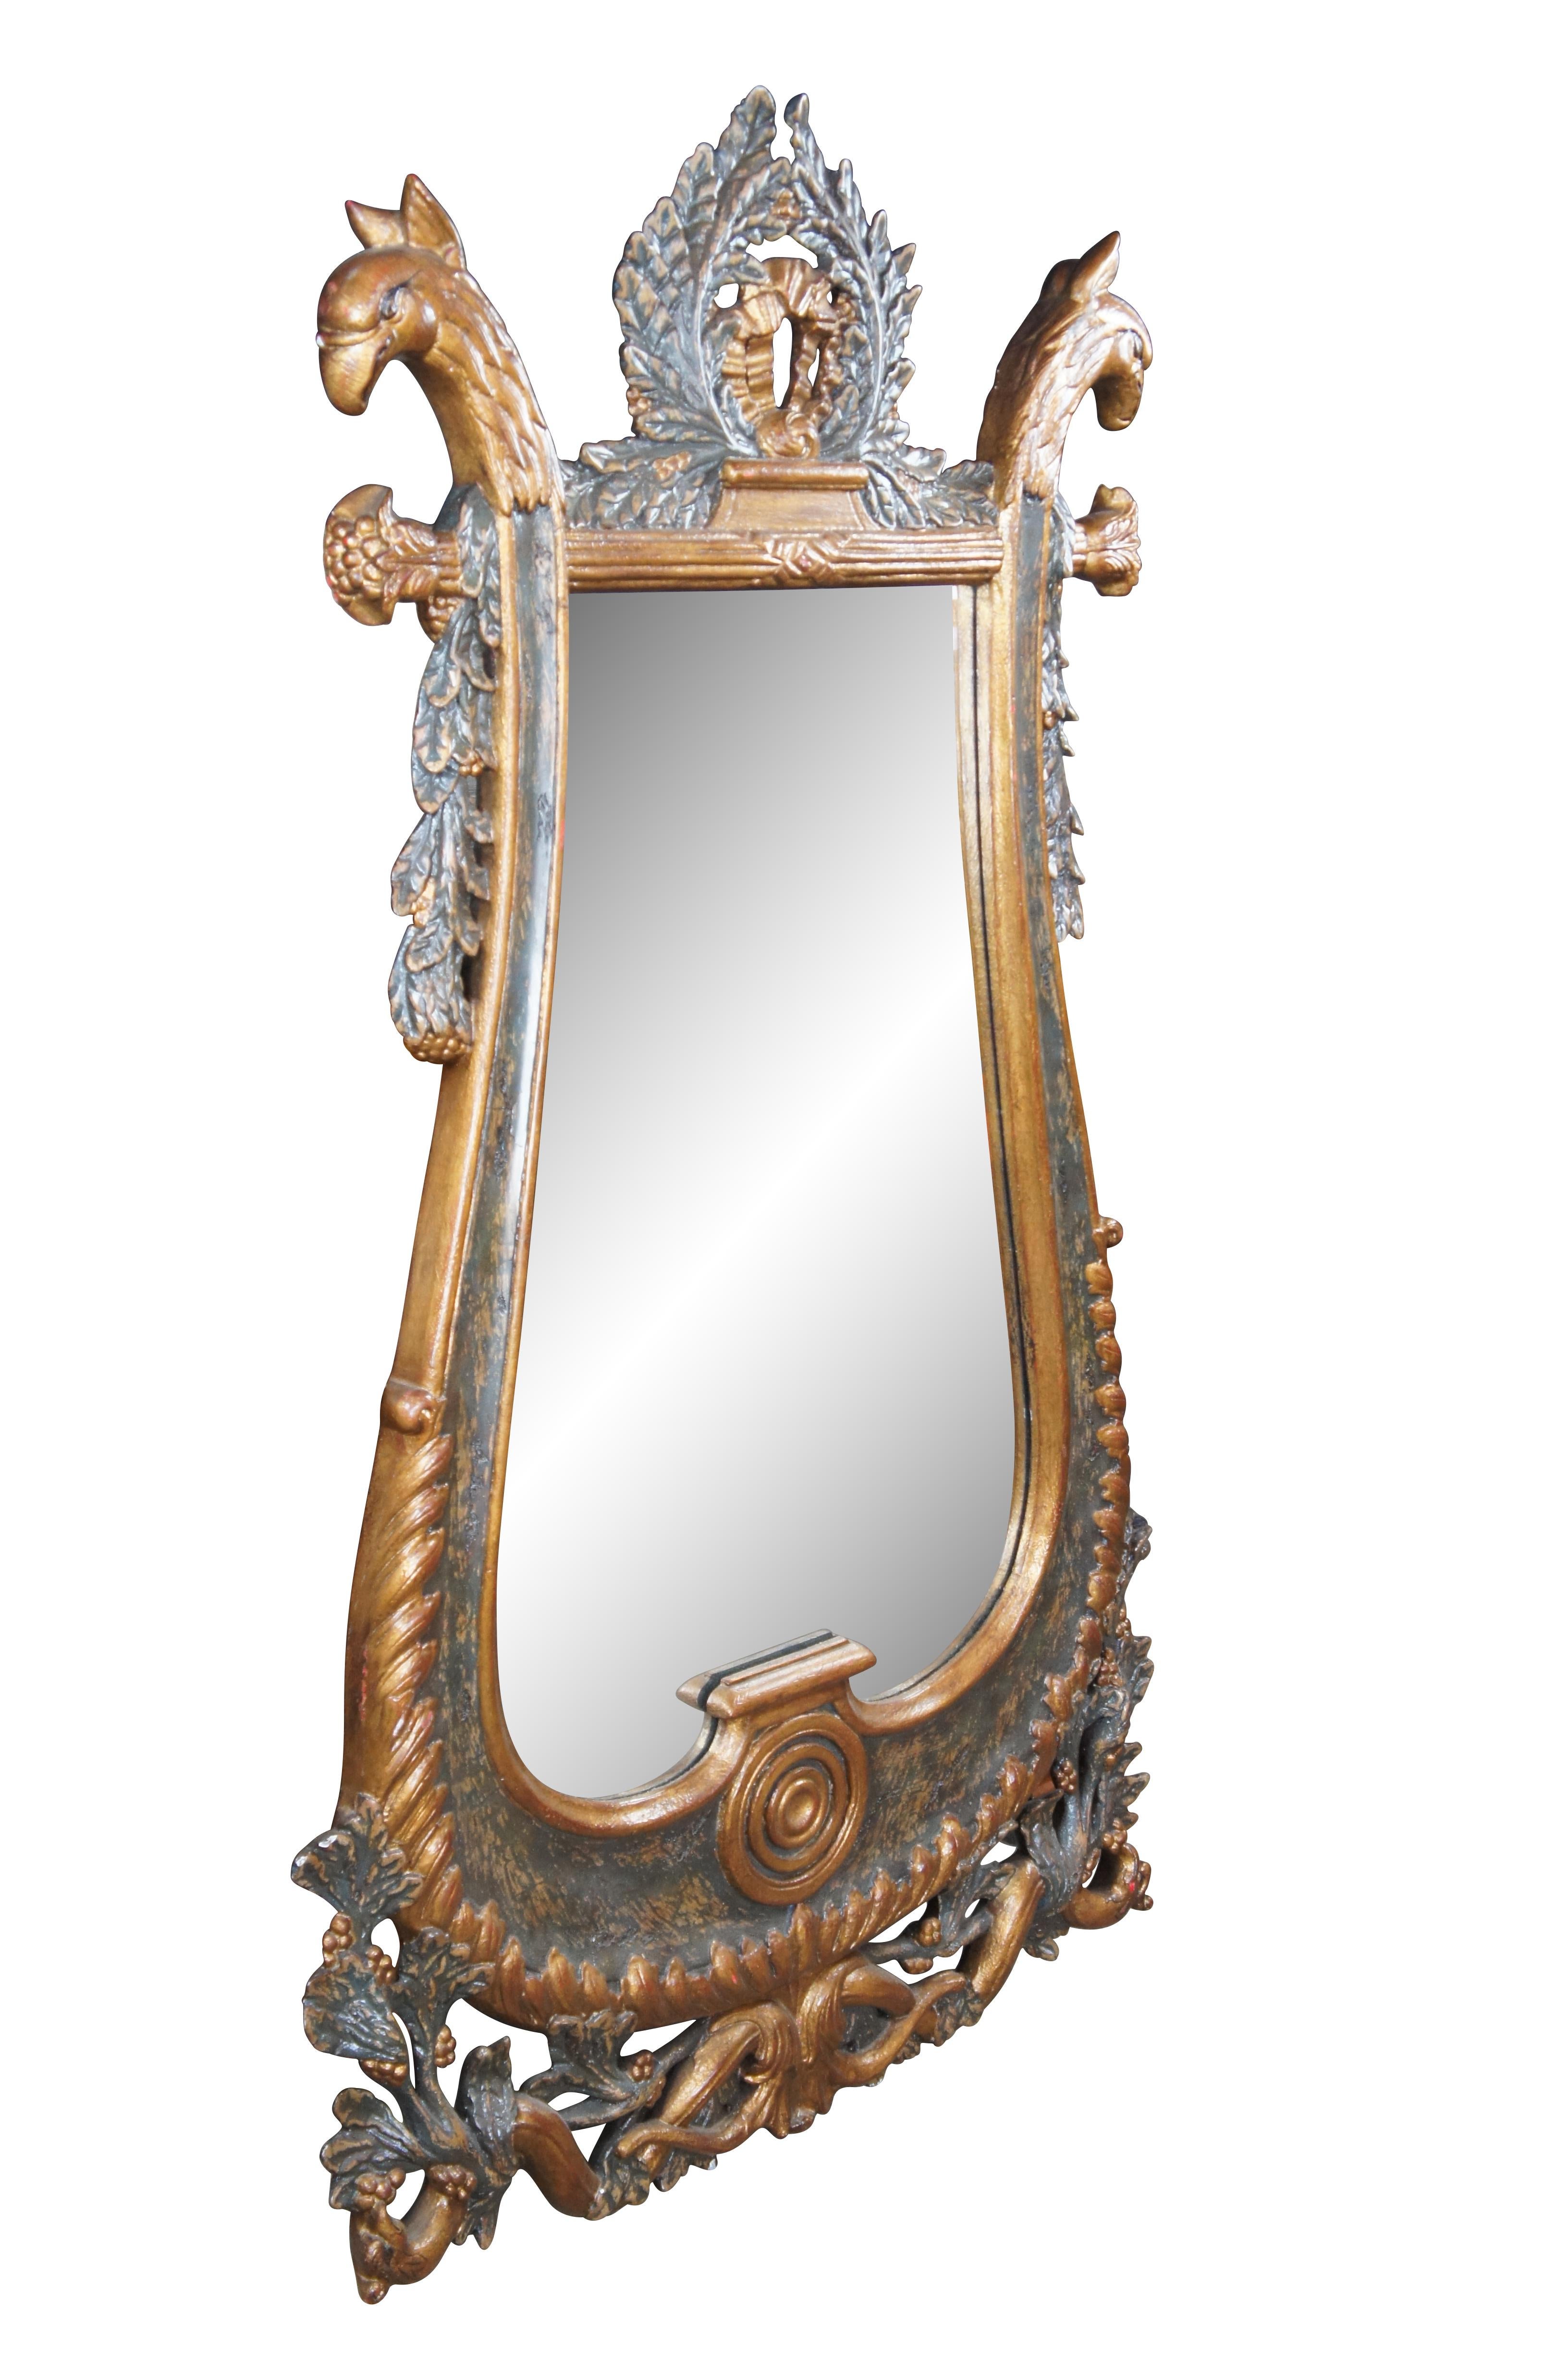 An elegant Louis XVI inspired wall hanging mirror by Alfonso Marina, circa late 20th century. Made from mahogany with ornate painted details.  Features a lyre shape with ornate central wreath flanked by figural griffon heads.   The body of the